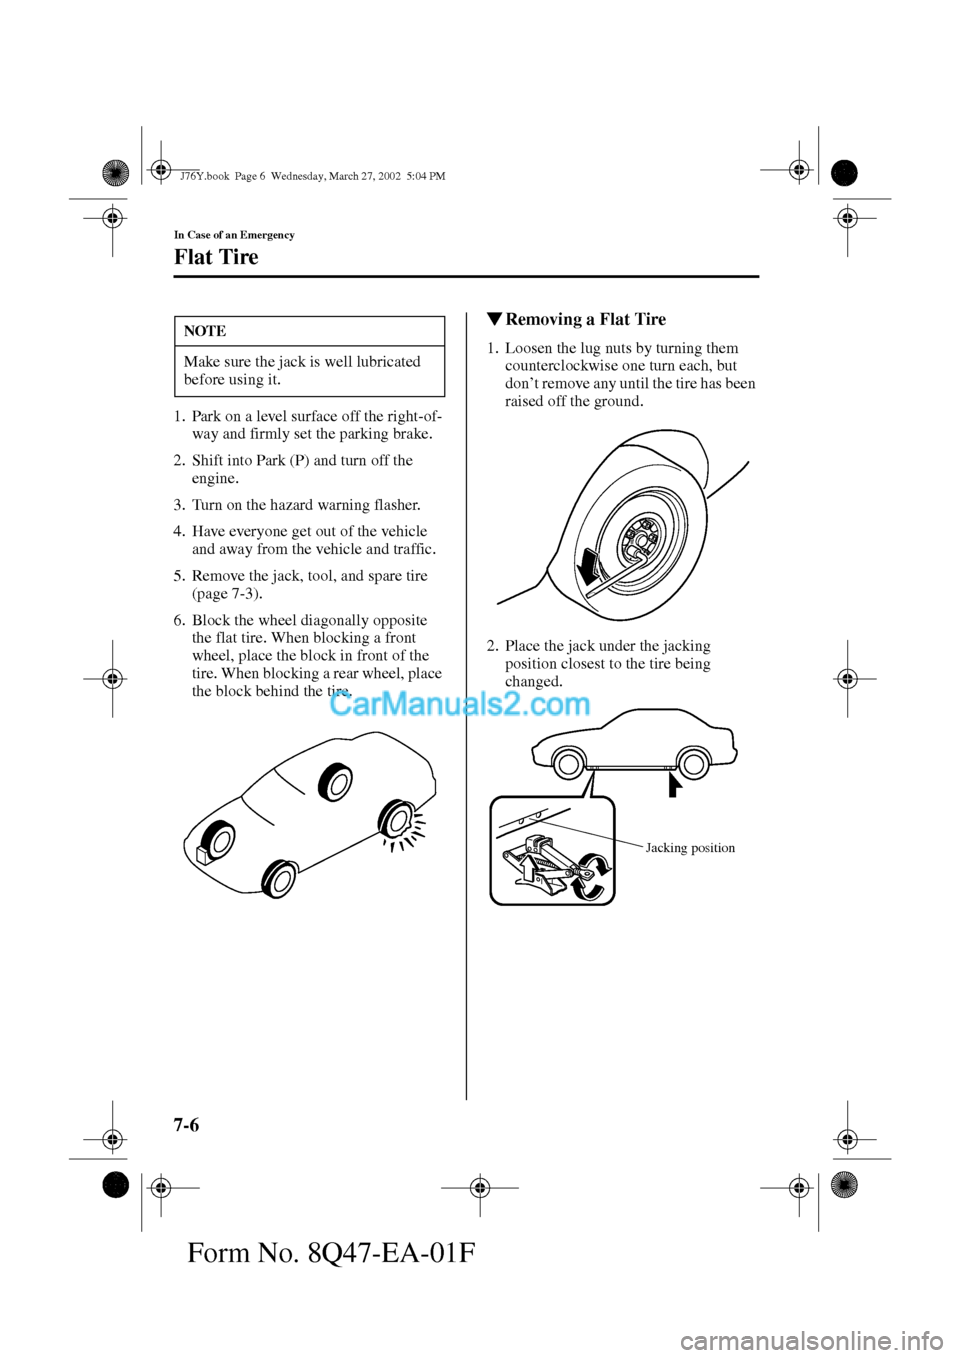 MAZDA MODEL MILLENIA 2002   (in English) Owners Manual 7-6
In Case of an Emergency
Flat Tire
Form No. 8Q47-EA-01F
1. Park on a level surface off the right-of-
way and firmly set the parking brake.
2. Shift into Park (P) and turn off the 
engine.
3. Turn o